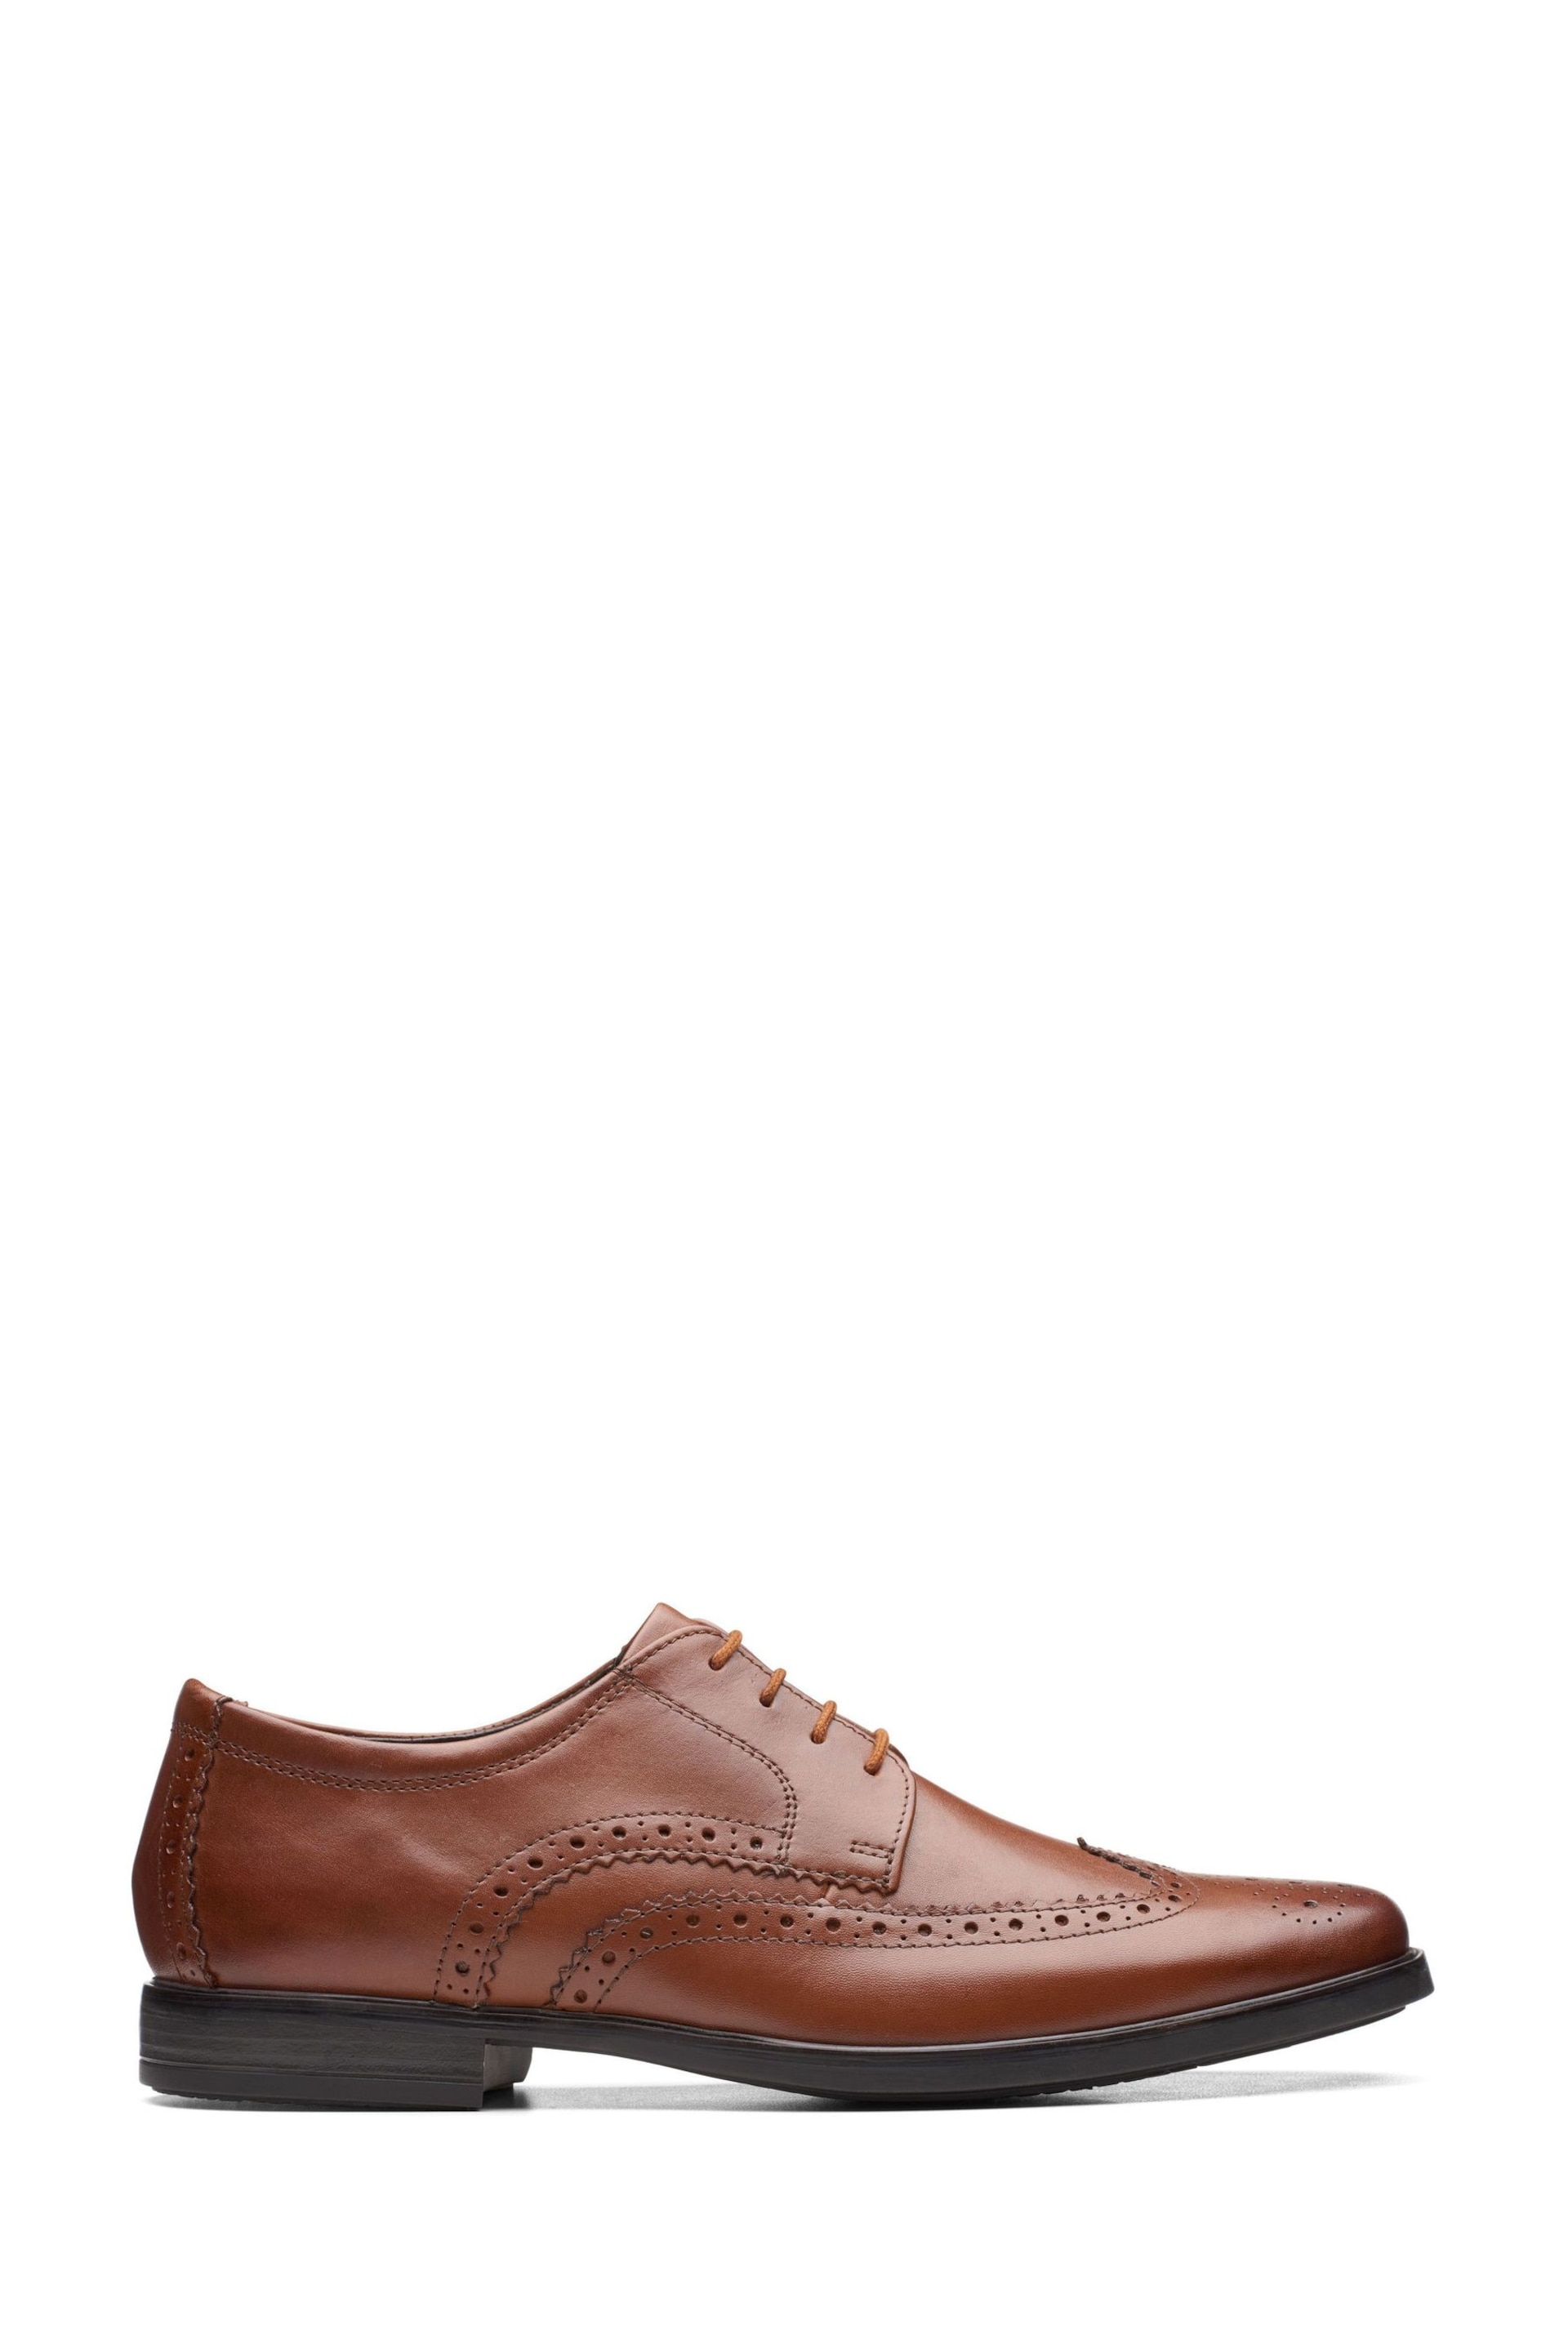 Clarks Natural Clarks Lea Howard Wing Shoes - Image 1 of 7